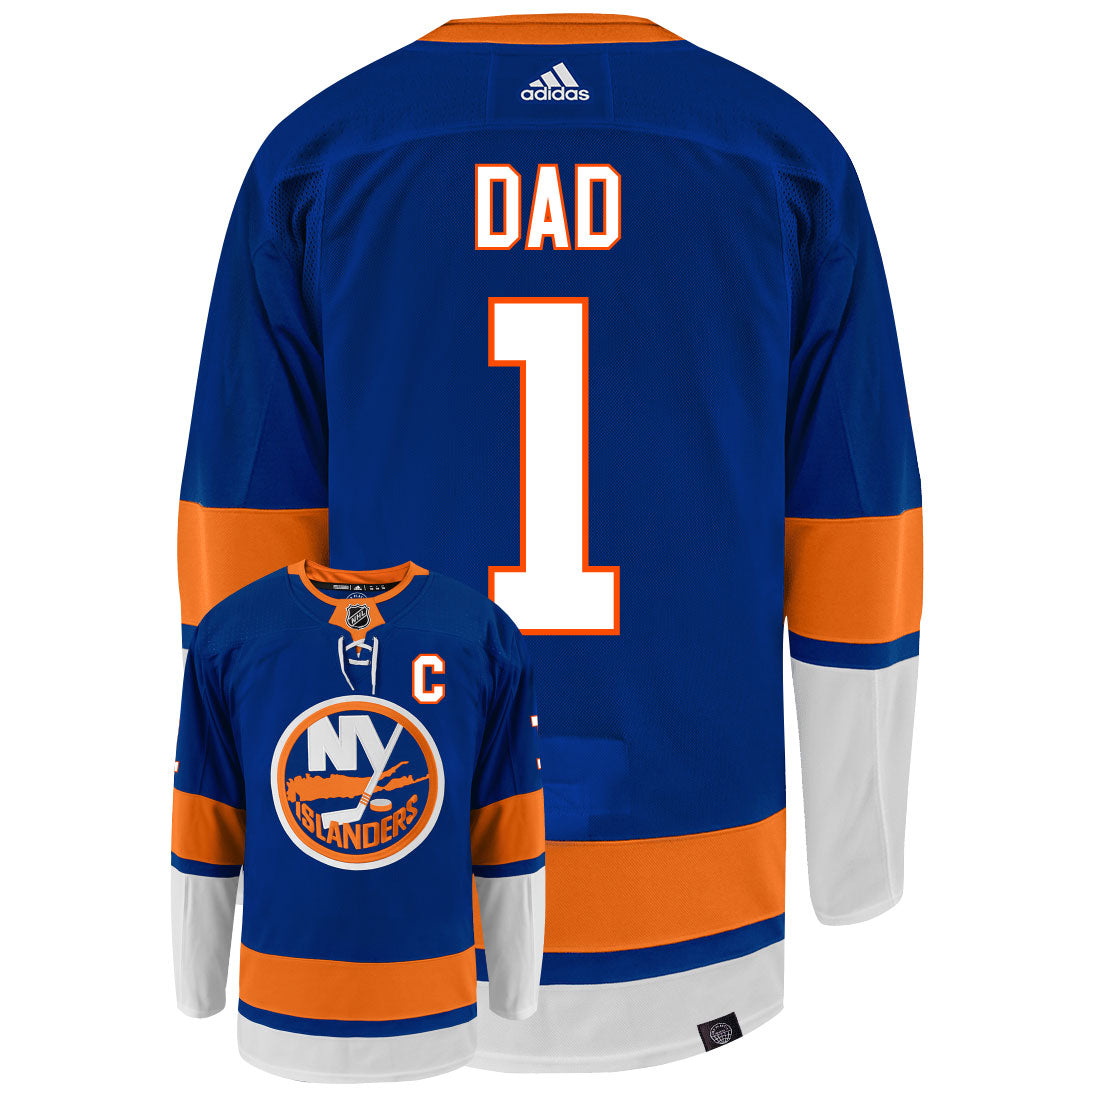 New York Islanders Dad Number One Adidas Primegreen Authentic NHL Hockey Jersey - Back/Front View